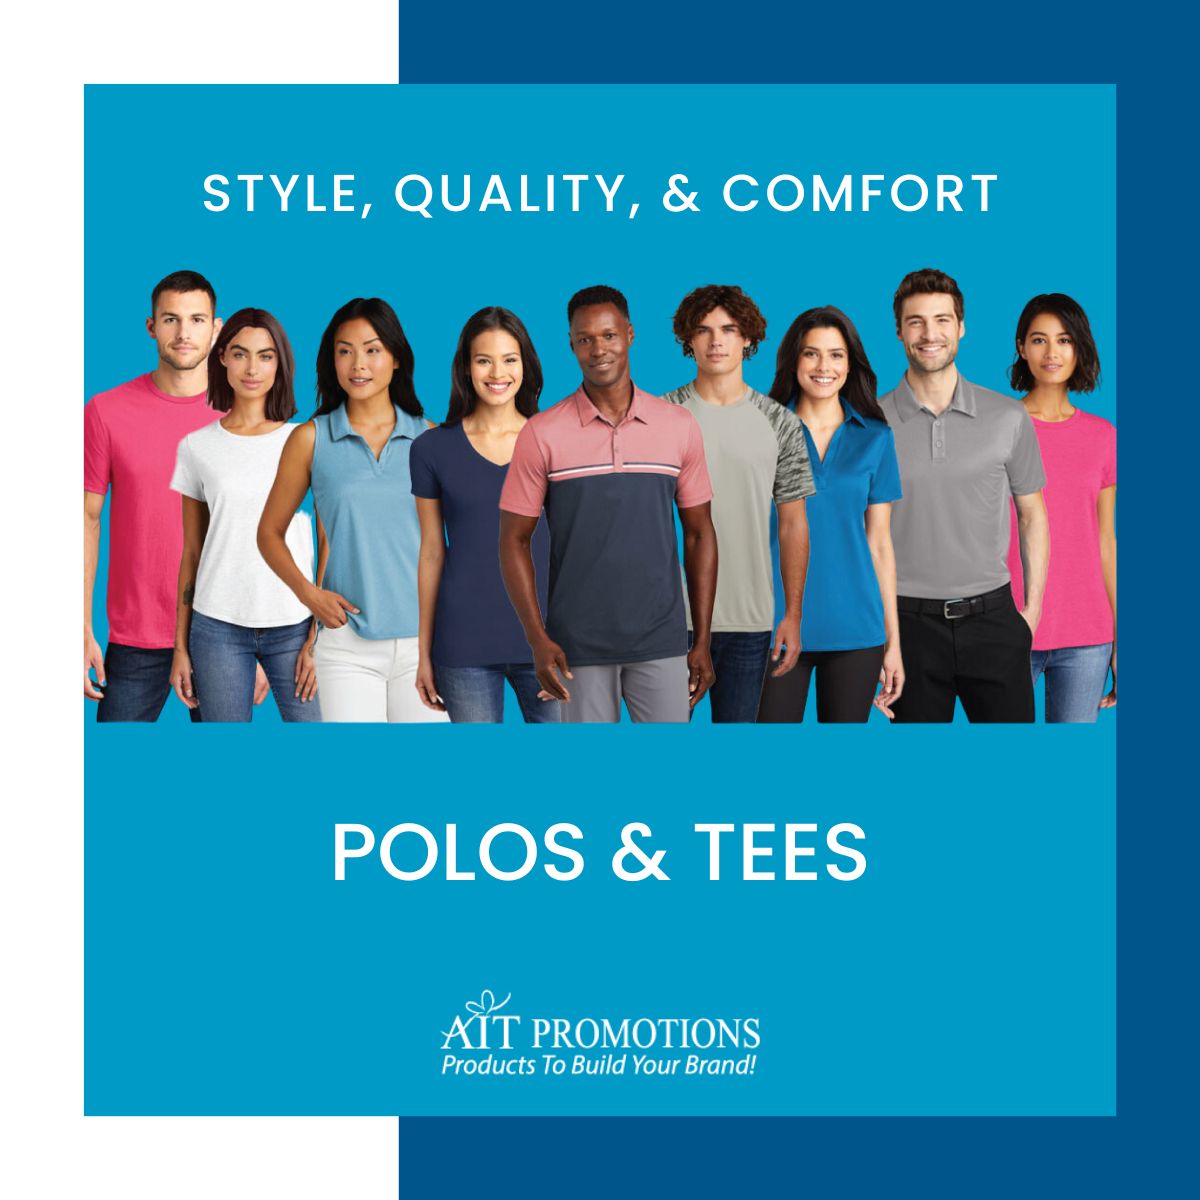 Polos And Tees –
🆈🅴🆂, 🅿🅻🅴🅰🆂🅴!

Comfy fabric and short sleeves for those long, hot summer days.
.
.
.
#apparel #summertees #polos #corporateapparel #brandable #summerapparel